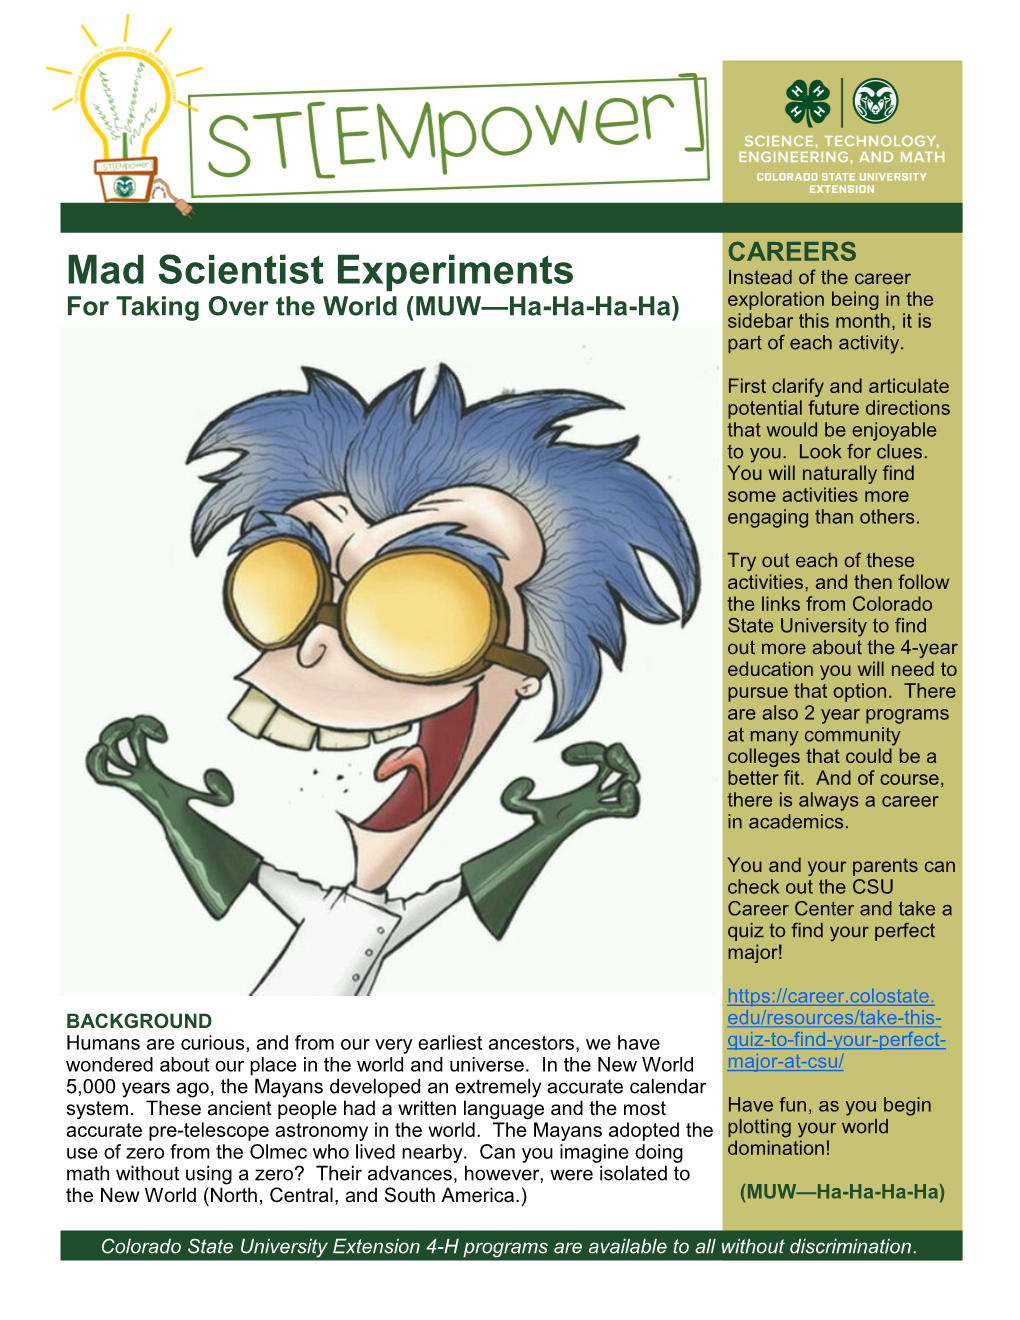 Mad Scientist Experiments Instead of the Career for Taking Over the World (MUW—Ha-Ha-Ha-Ha) Exploration Being in the Sidebar This Month, It Is Part of Each Activity